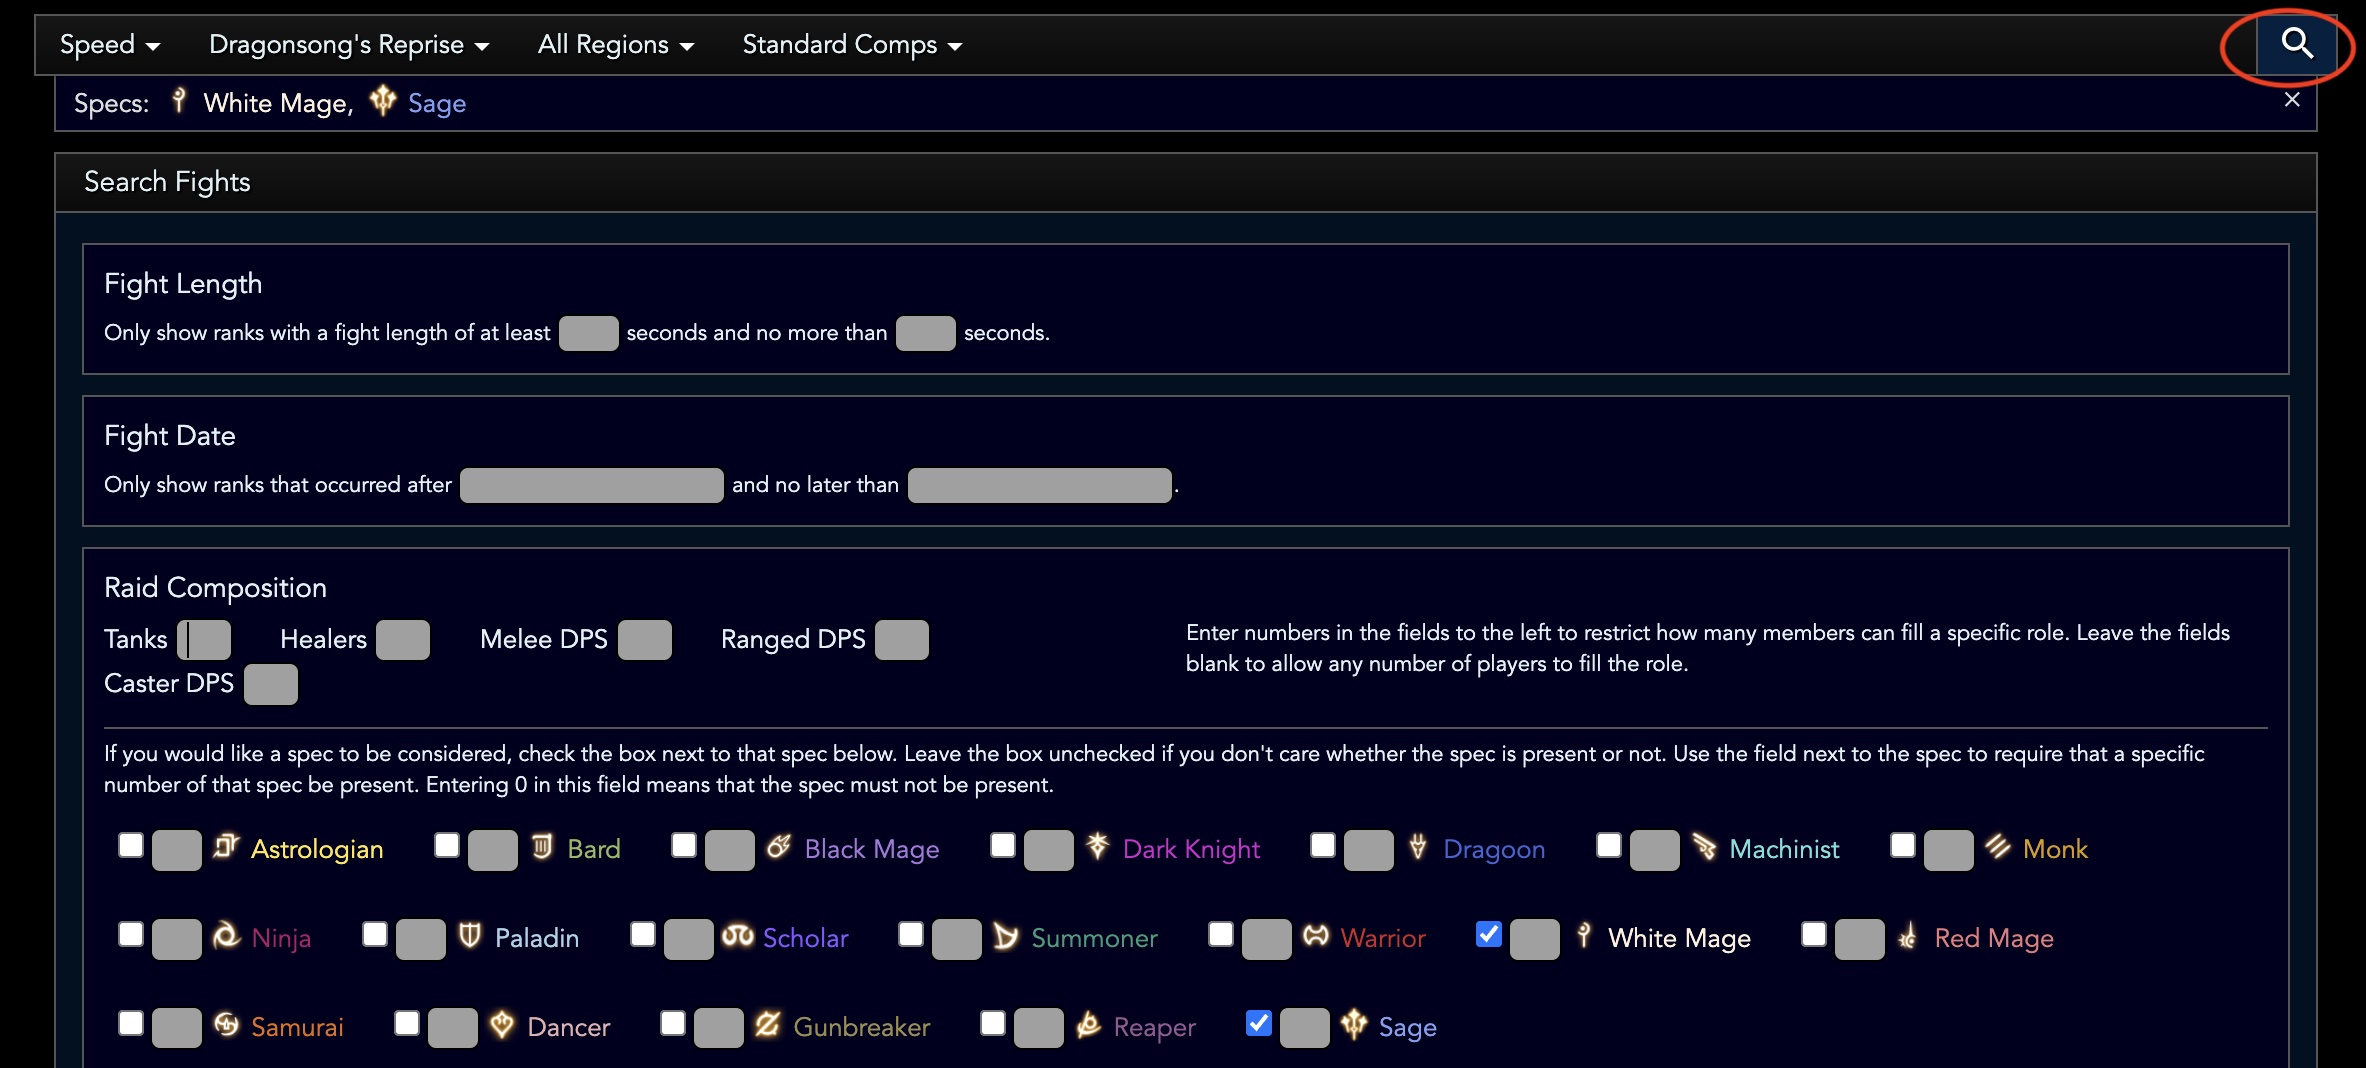 A search for comps
    including both White Mage and Sage.